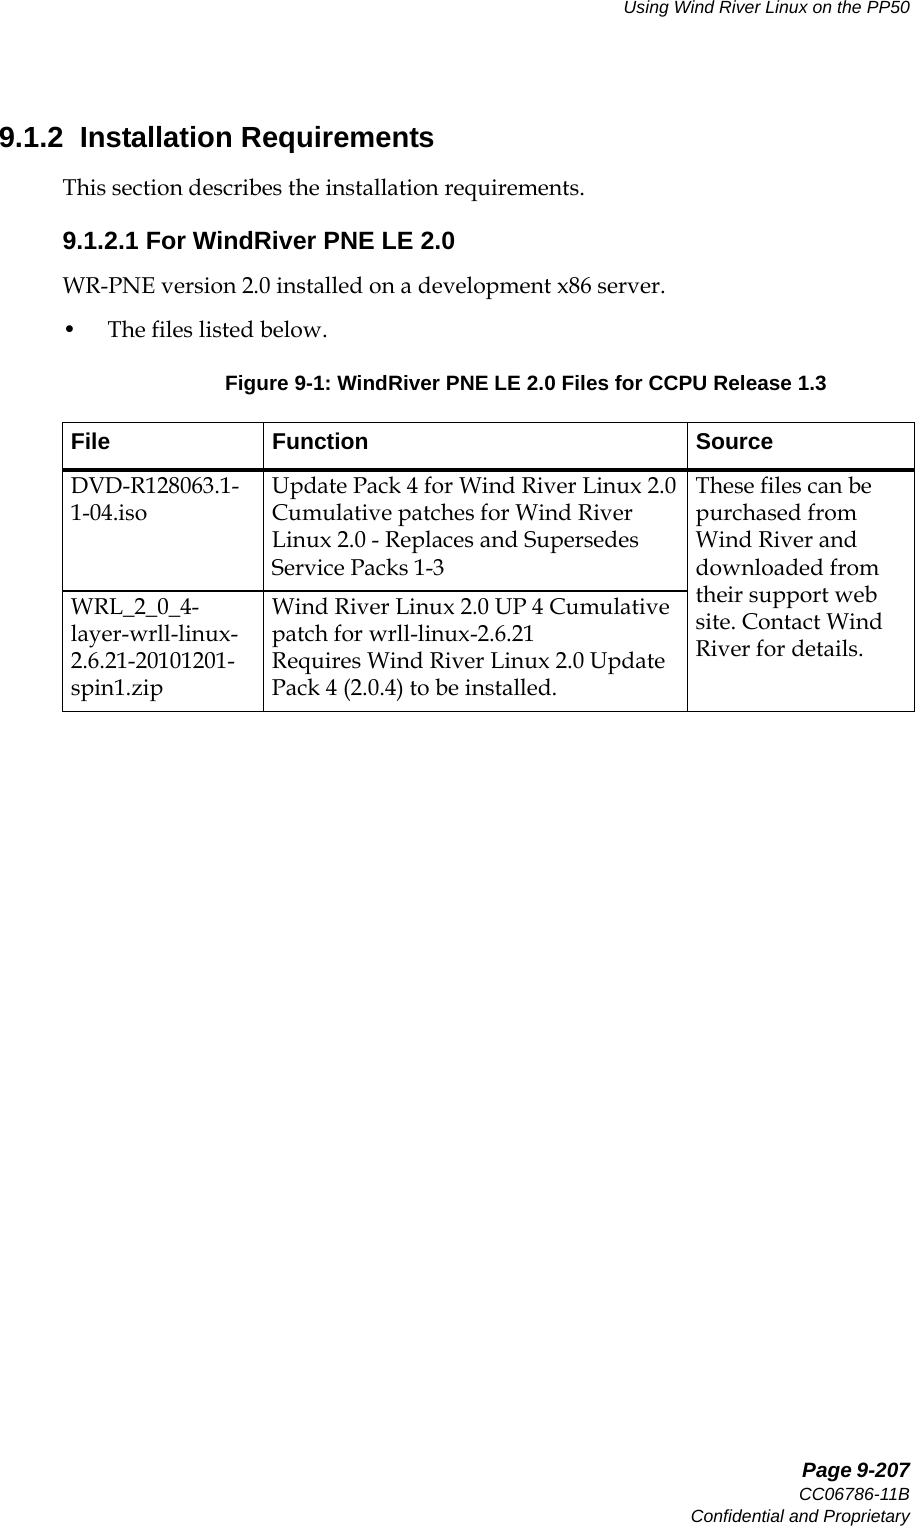   Page 9-207CC06786-11BConfidential and ProprietaryUsing Wind River Linux on the PP5014ABABPreliminary9.1.2  Installation RequirementsThis section describes the installation requirements. 9.1.2.1 For WindRiver PNE LE 2.0WR-PNE version 2.0 installed on a development x86 server.• The files listed below. Figure 9-1: WindRiver PNE LE 2.0 Files for CCPU Release 1.3 File Function SourceDVD-R128063.1-1-04.isoUpdate Pack 4 for Wind River Linux 2.0Cumulative patches for Wind River Linux 2.0 - Replaces and Supersedes Service Packs 1-3These files can be purchased from Wind River and downloaded from their support web site. Contact Wind River for details.WRL_2_0_4-layer-wrll-linux-2.6.21-20101201-spin1.zipWind River Linux 2.0 UP 4 Cumulative patch for wrll-linux-2.6.21Requires Wind River Linux 2.0 Update Pack 4 (2.0.4) to be installed.